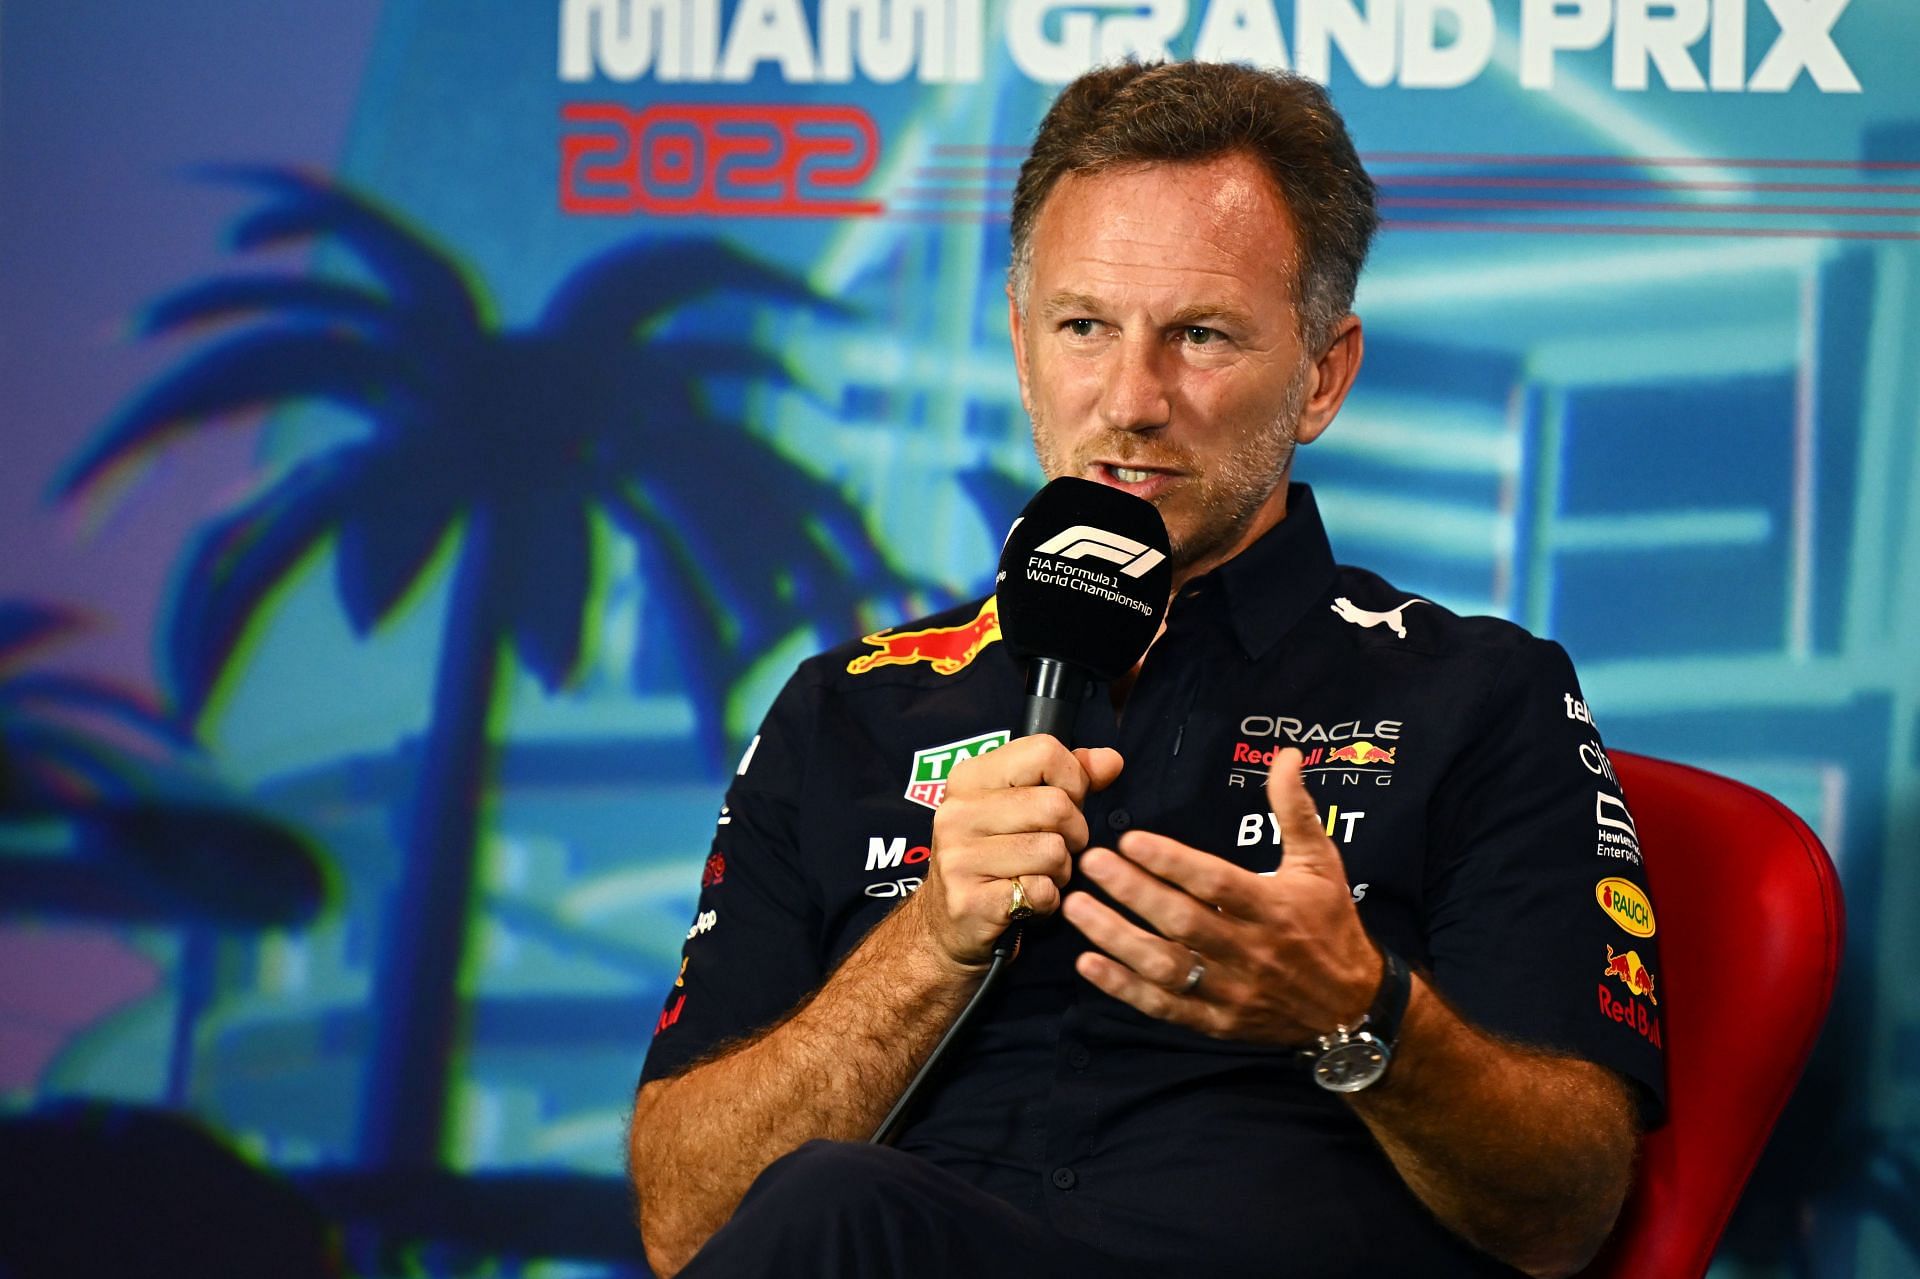 Red Bull Racing Team Principal Christian Horner talks in the Team Principals Press Conference prior to the 2022 Miami GP in Miami, Florida. (Photo by Clive Mason/Getty Images)